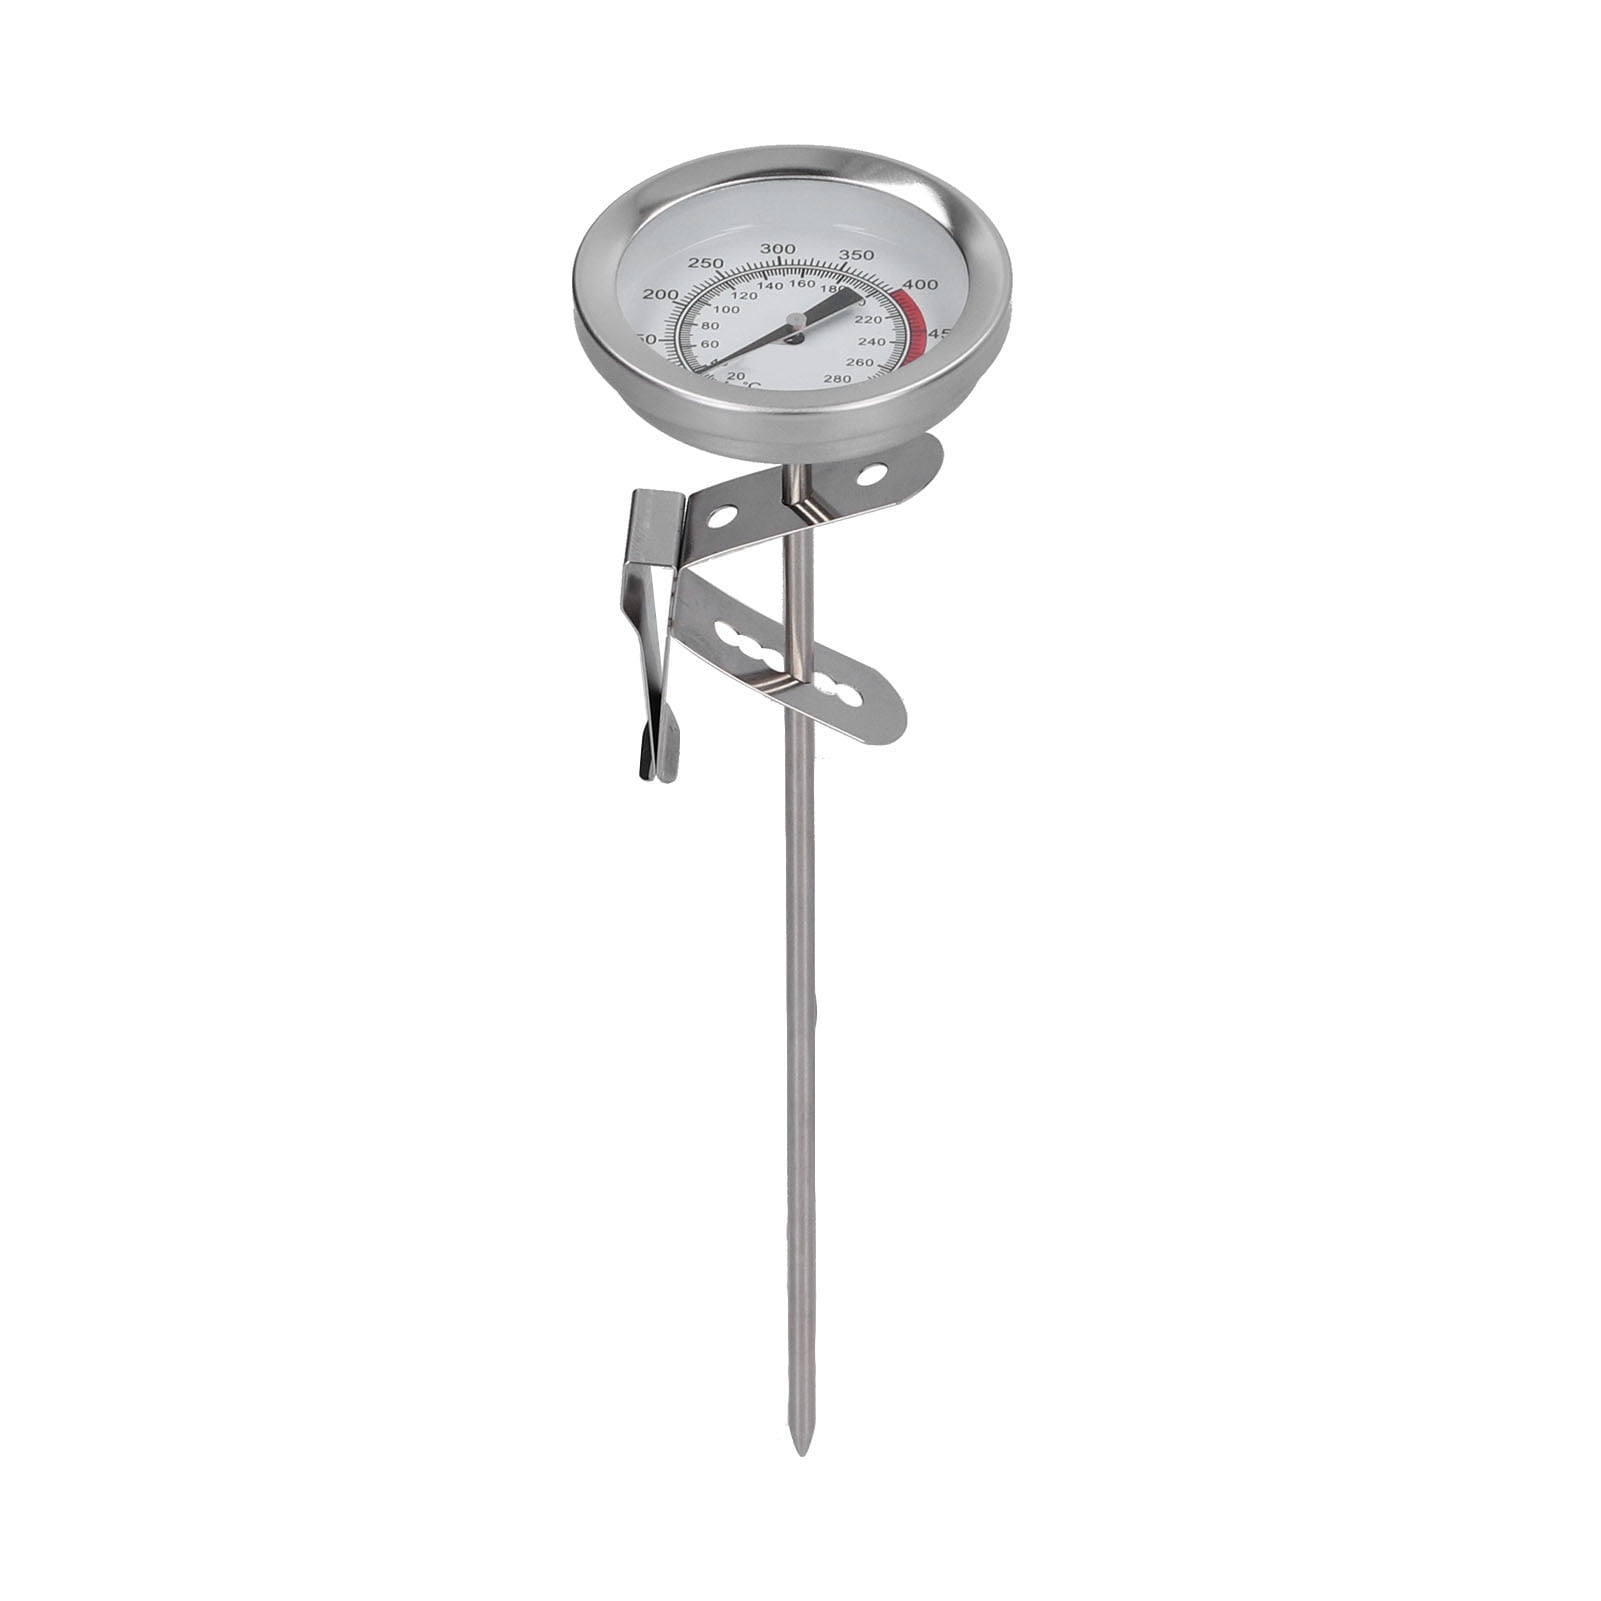 1pc 14cm High Precision Stainless Steel Coffee Thermometer For